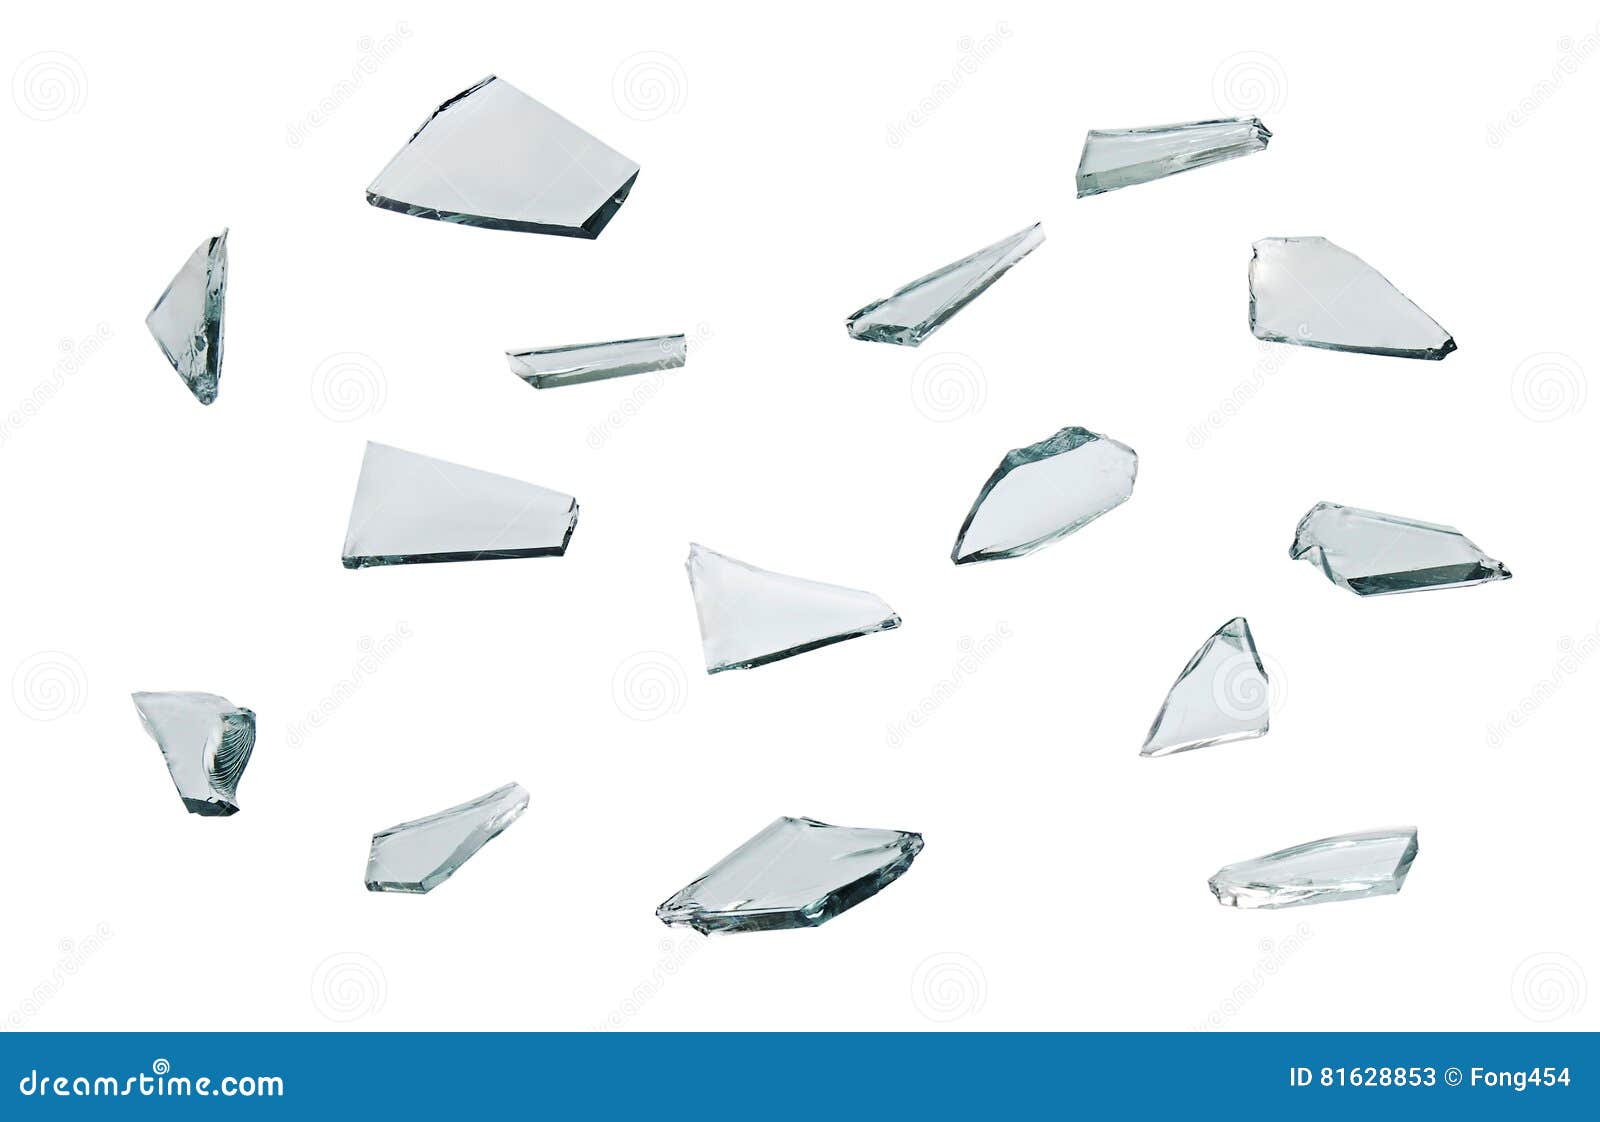 https://thumbs.dreamstime.com/z/broken-glass-sharp-pieces-isolated-white-background-photo-take-81628853.jpg